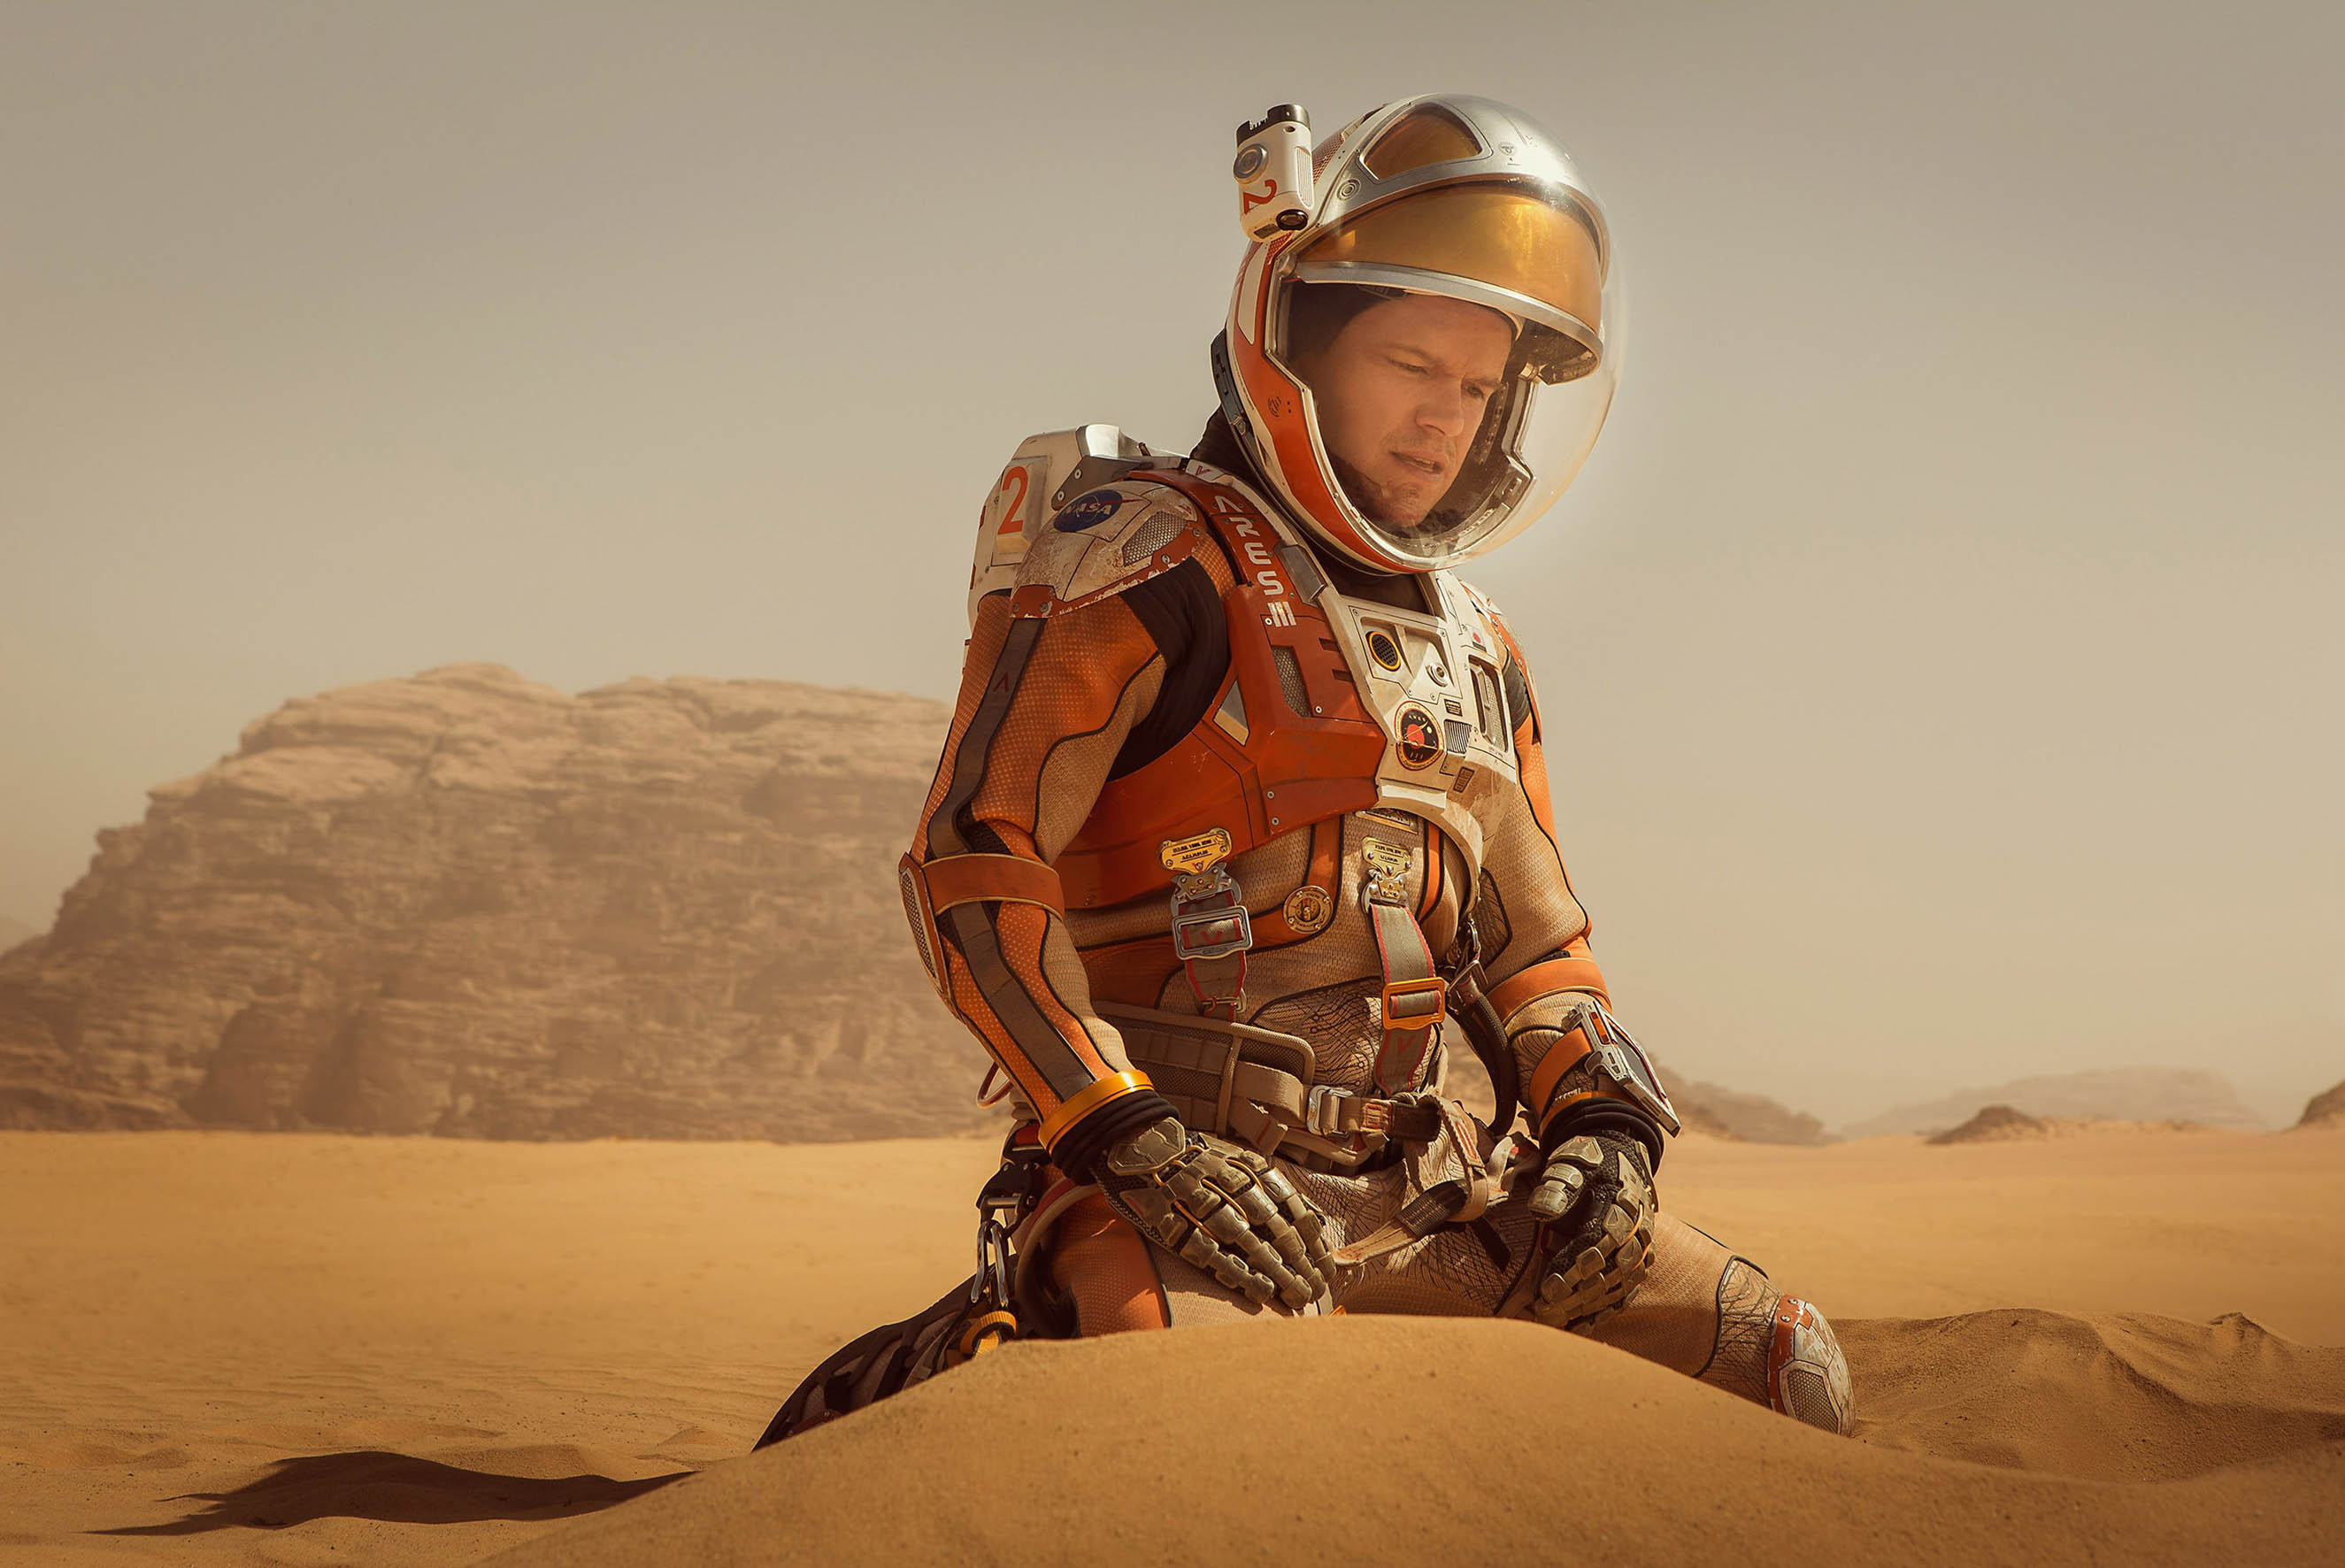 video review : The Martian